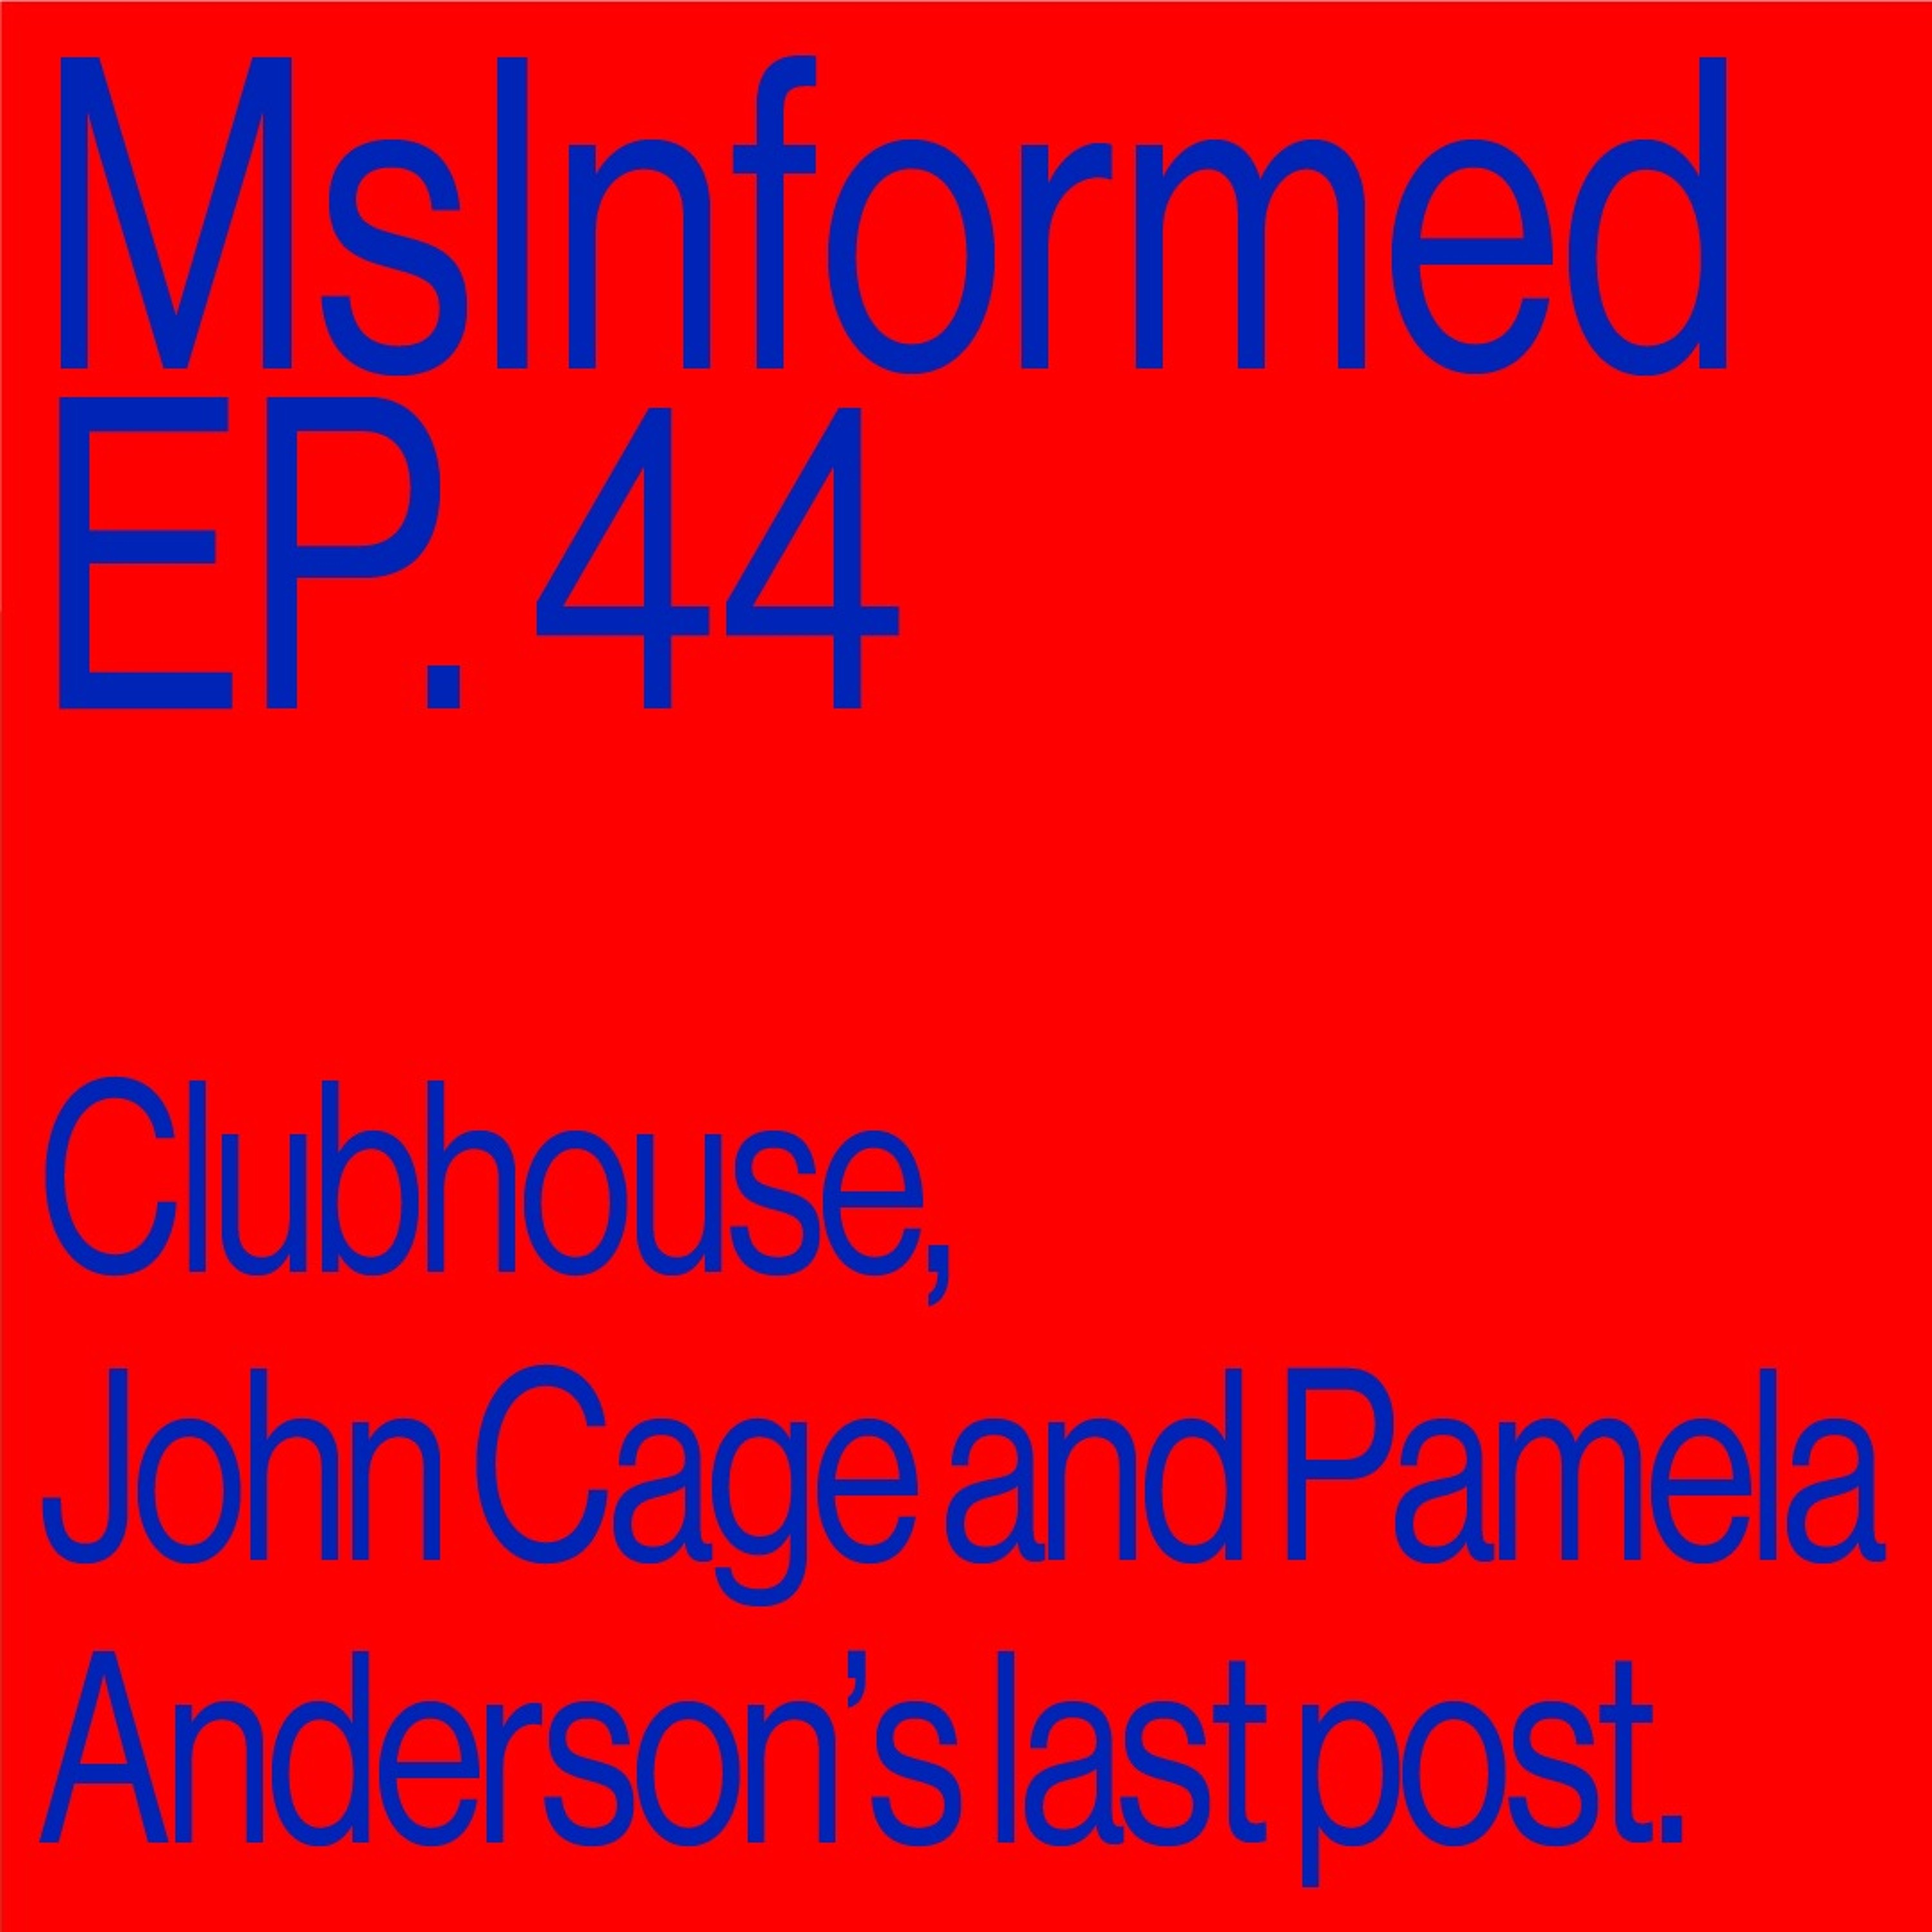 Episode 44: Clubhouse, John Cage, and Pamela Anderson’s last post